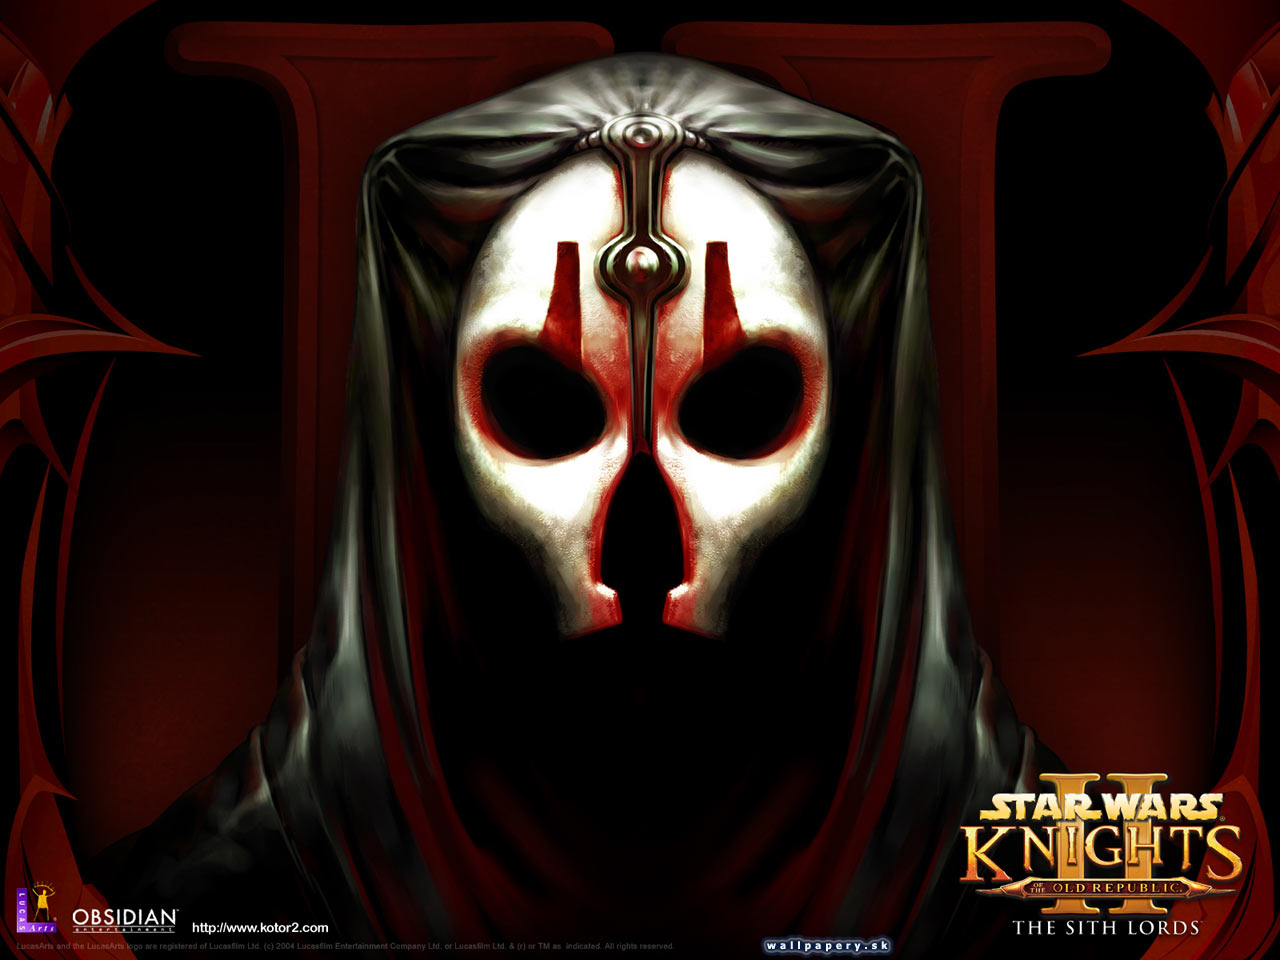 Star Wars: Knights of the Old Republic 2: The Sith Lords - wallpaper 3